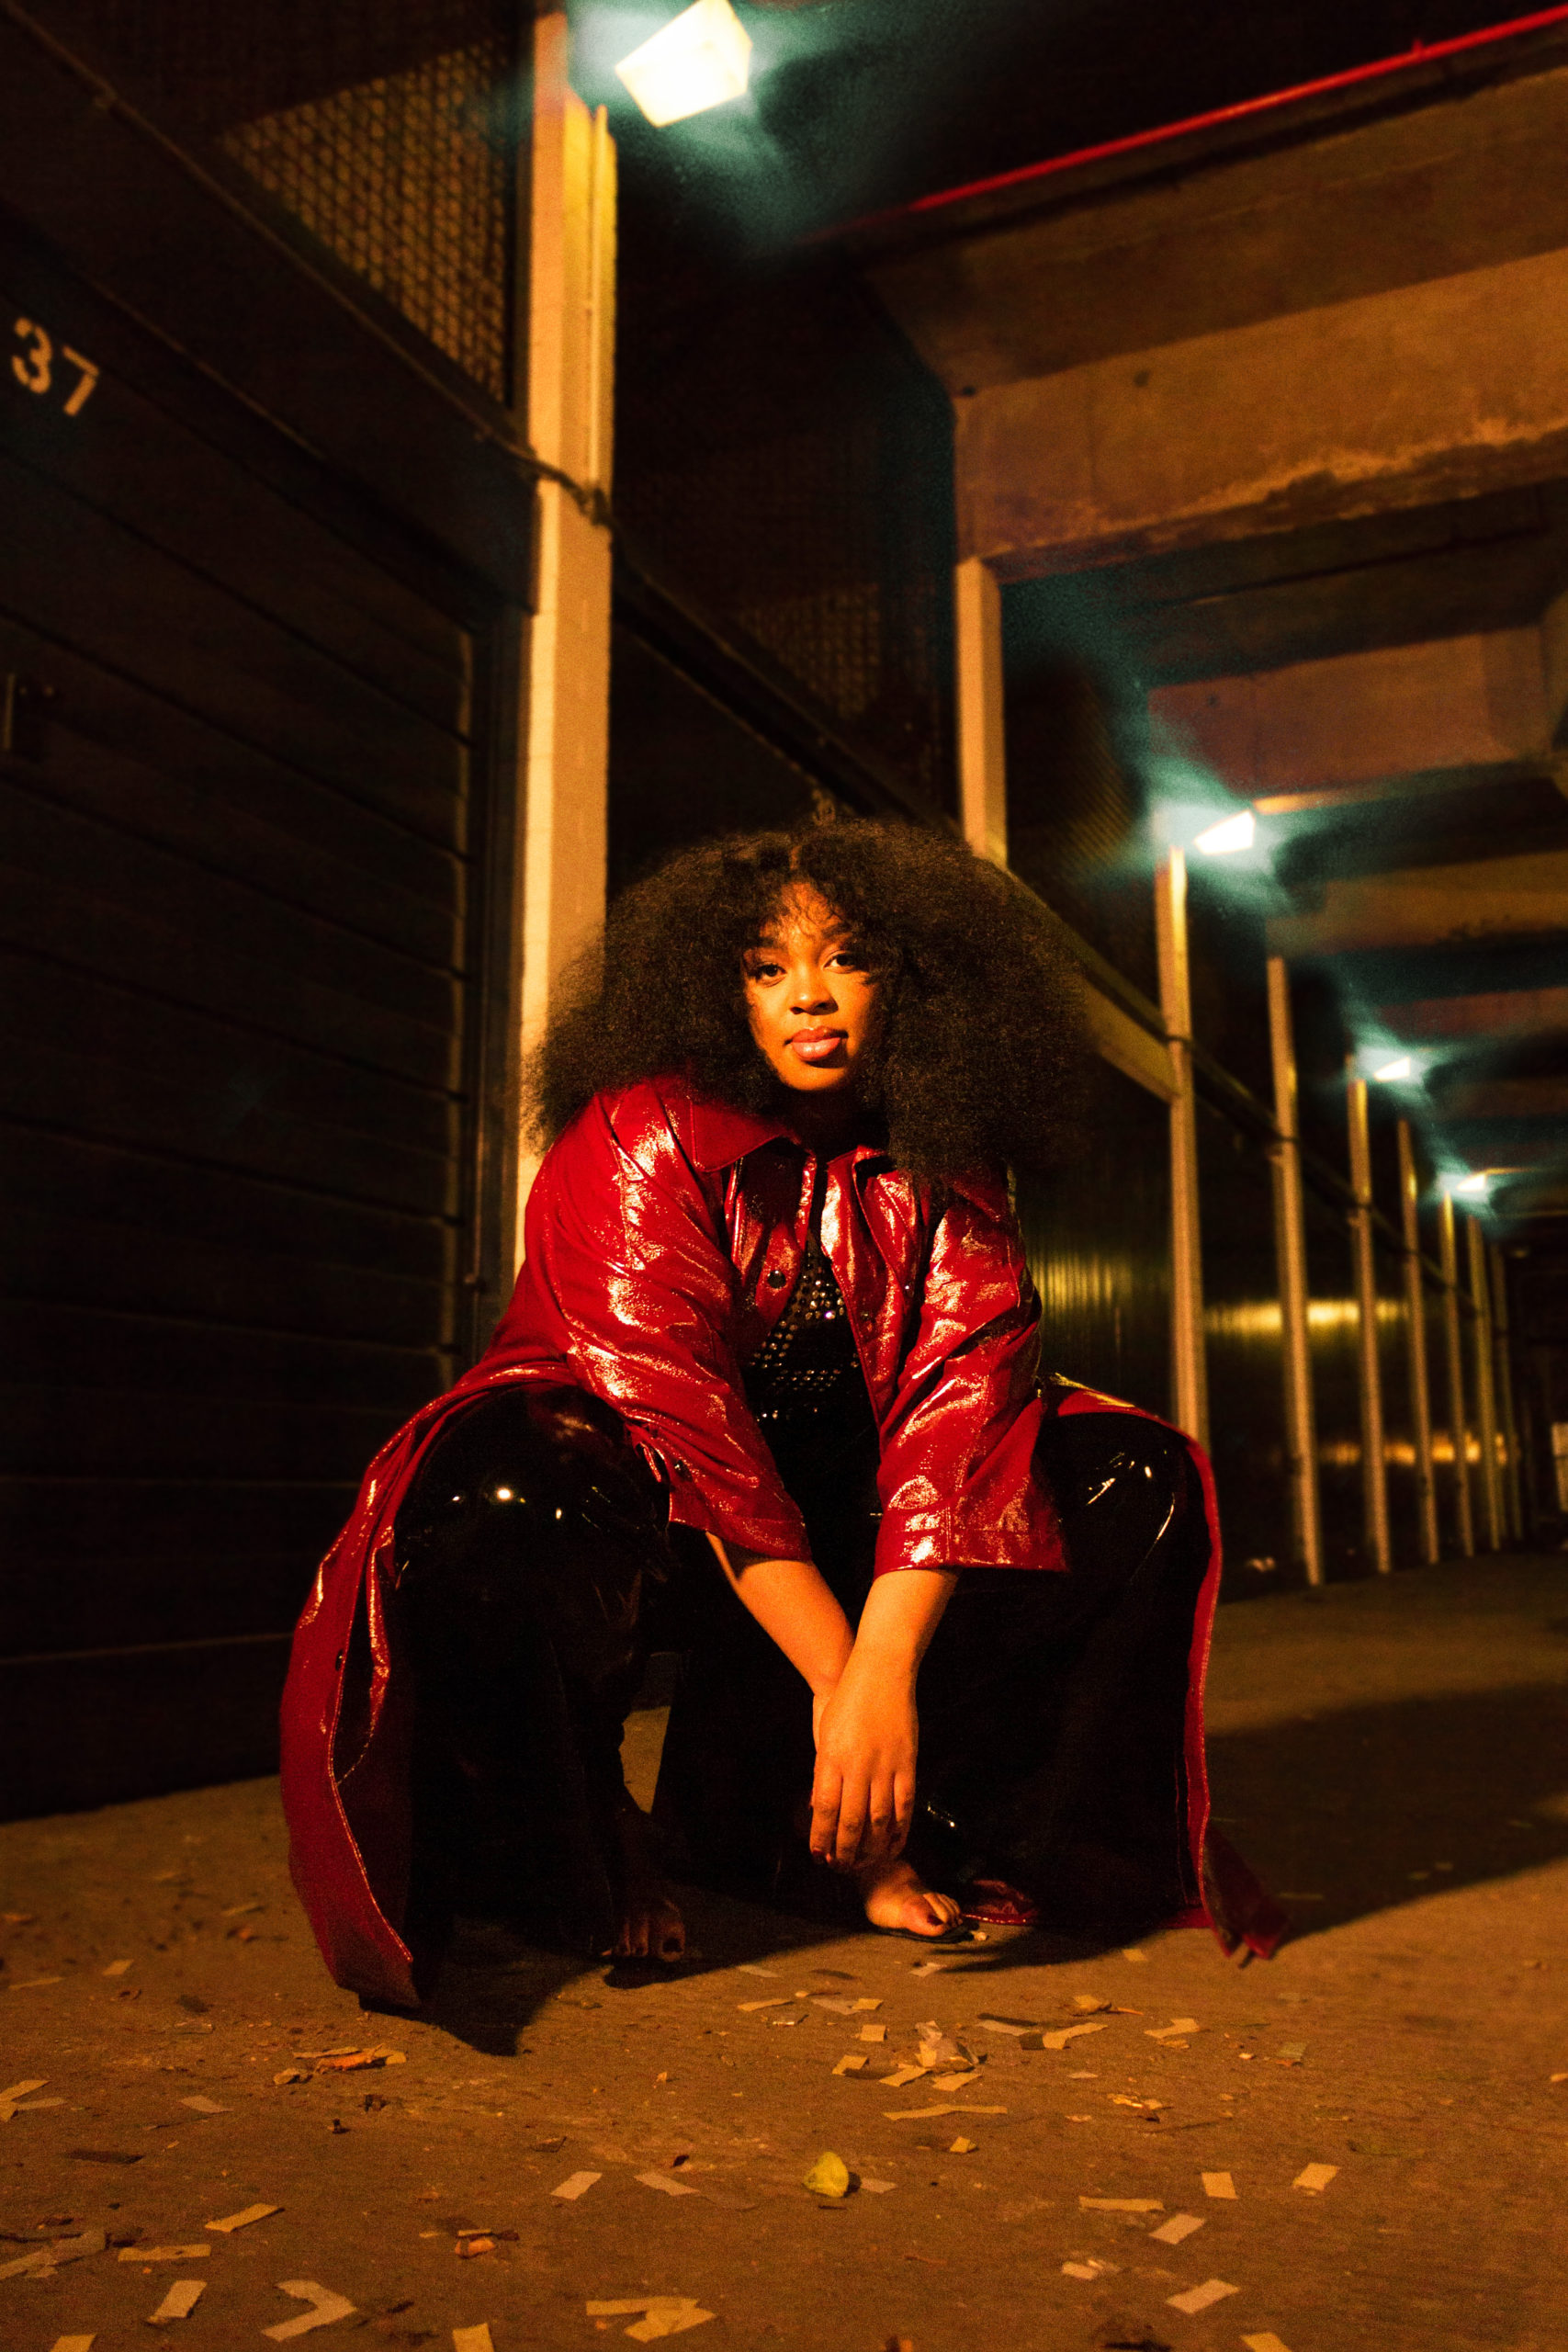 You better make time for Mary Sho {@marysho} – The London songstress empowering black women through her music